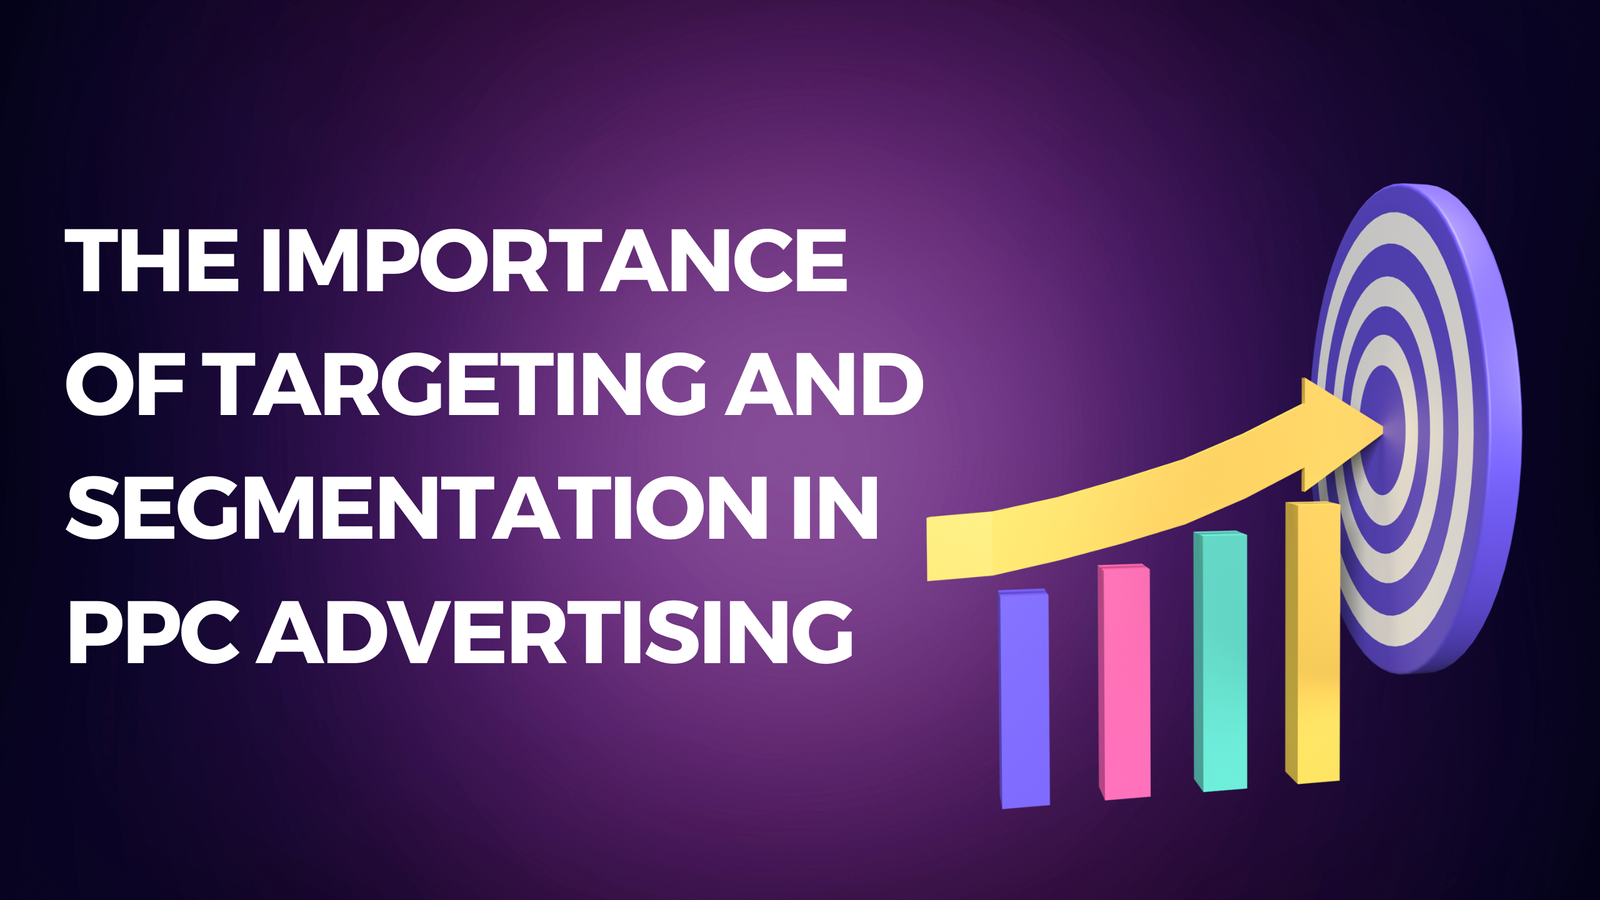 The Importance of Targeting and Segmentation in PPC Advertising